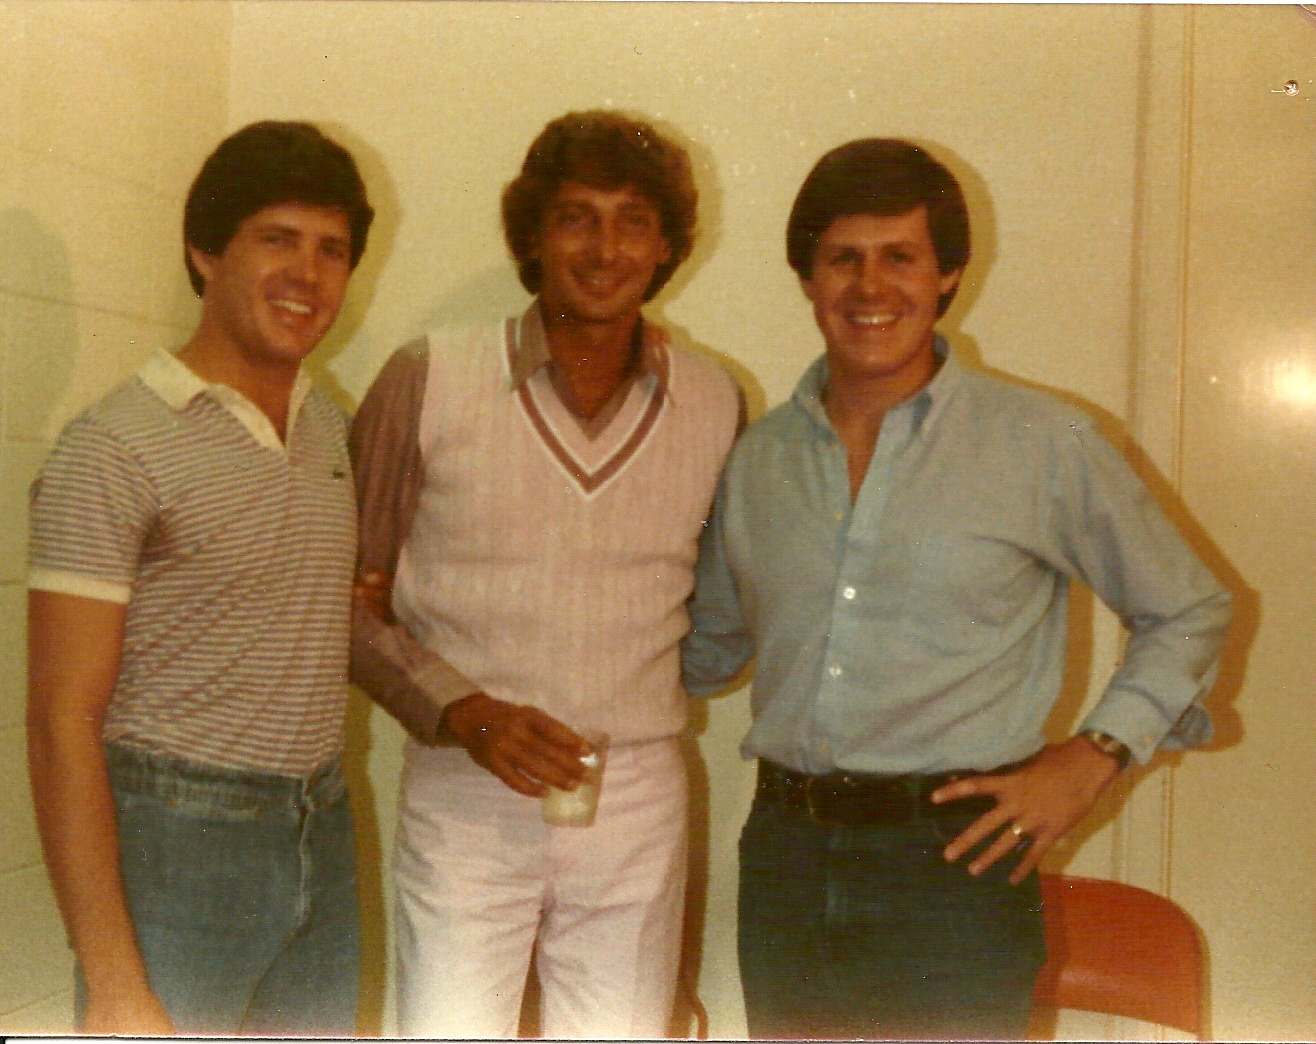 B and B with Barry Manilow.